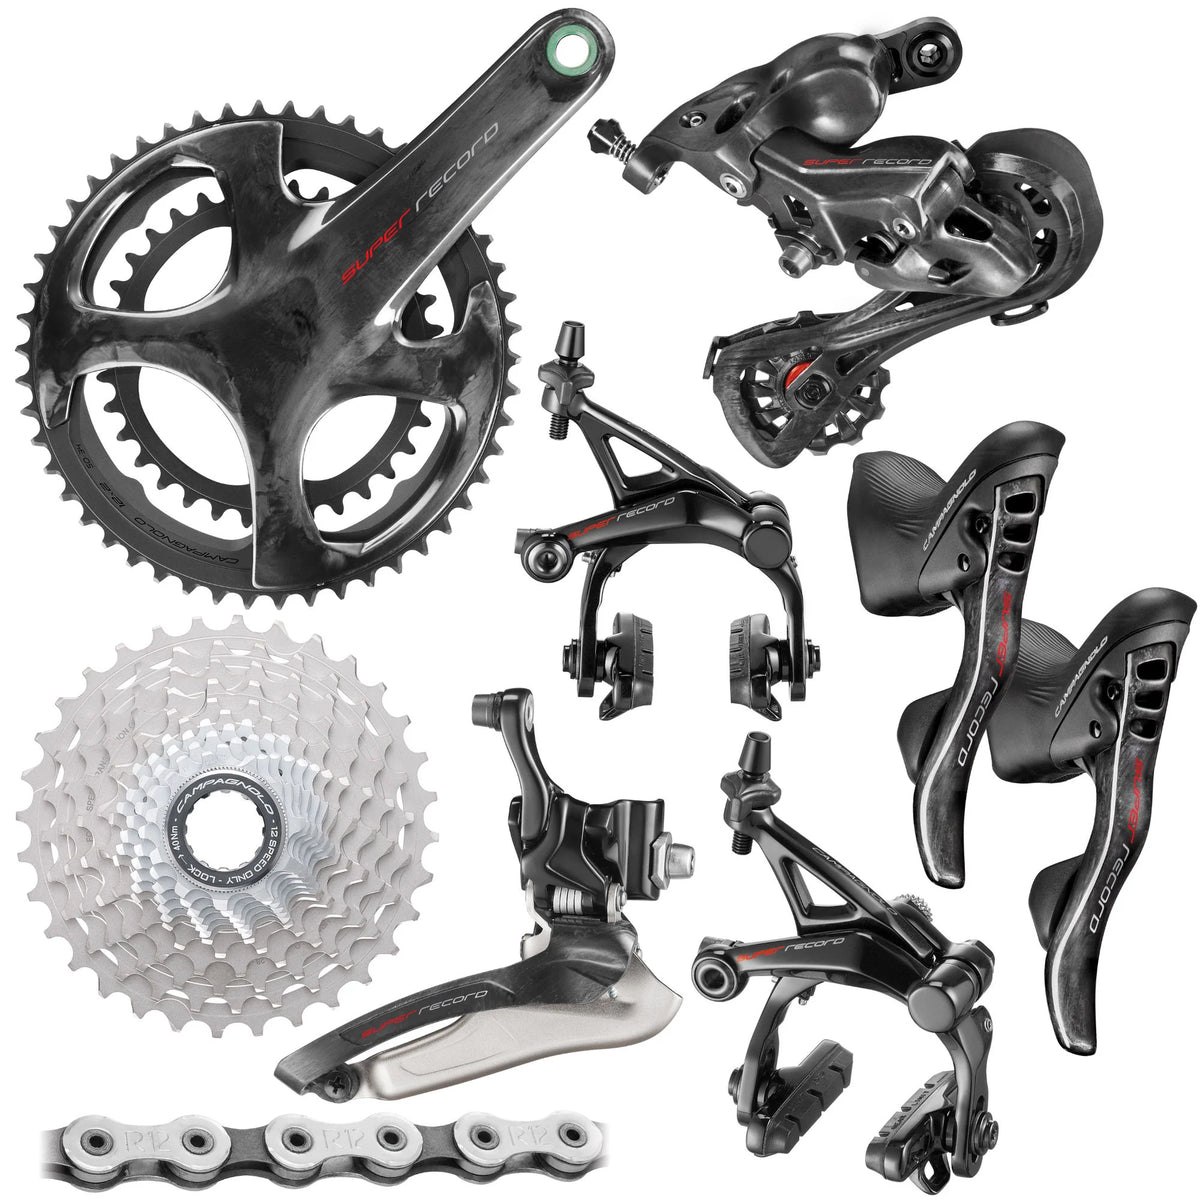 Campagnolo Super Record 12 Groupset